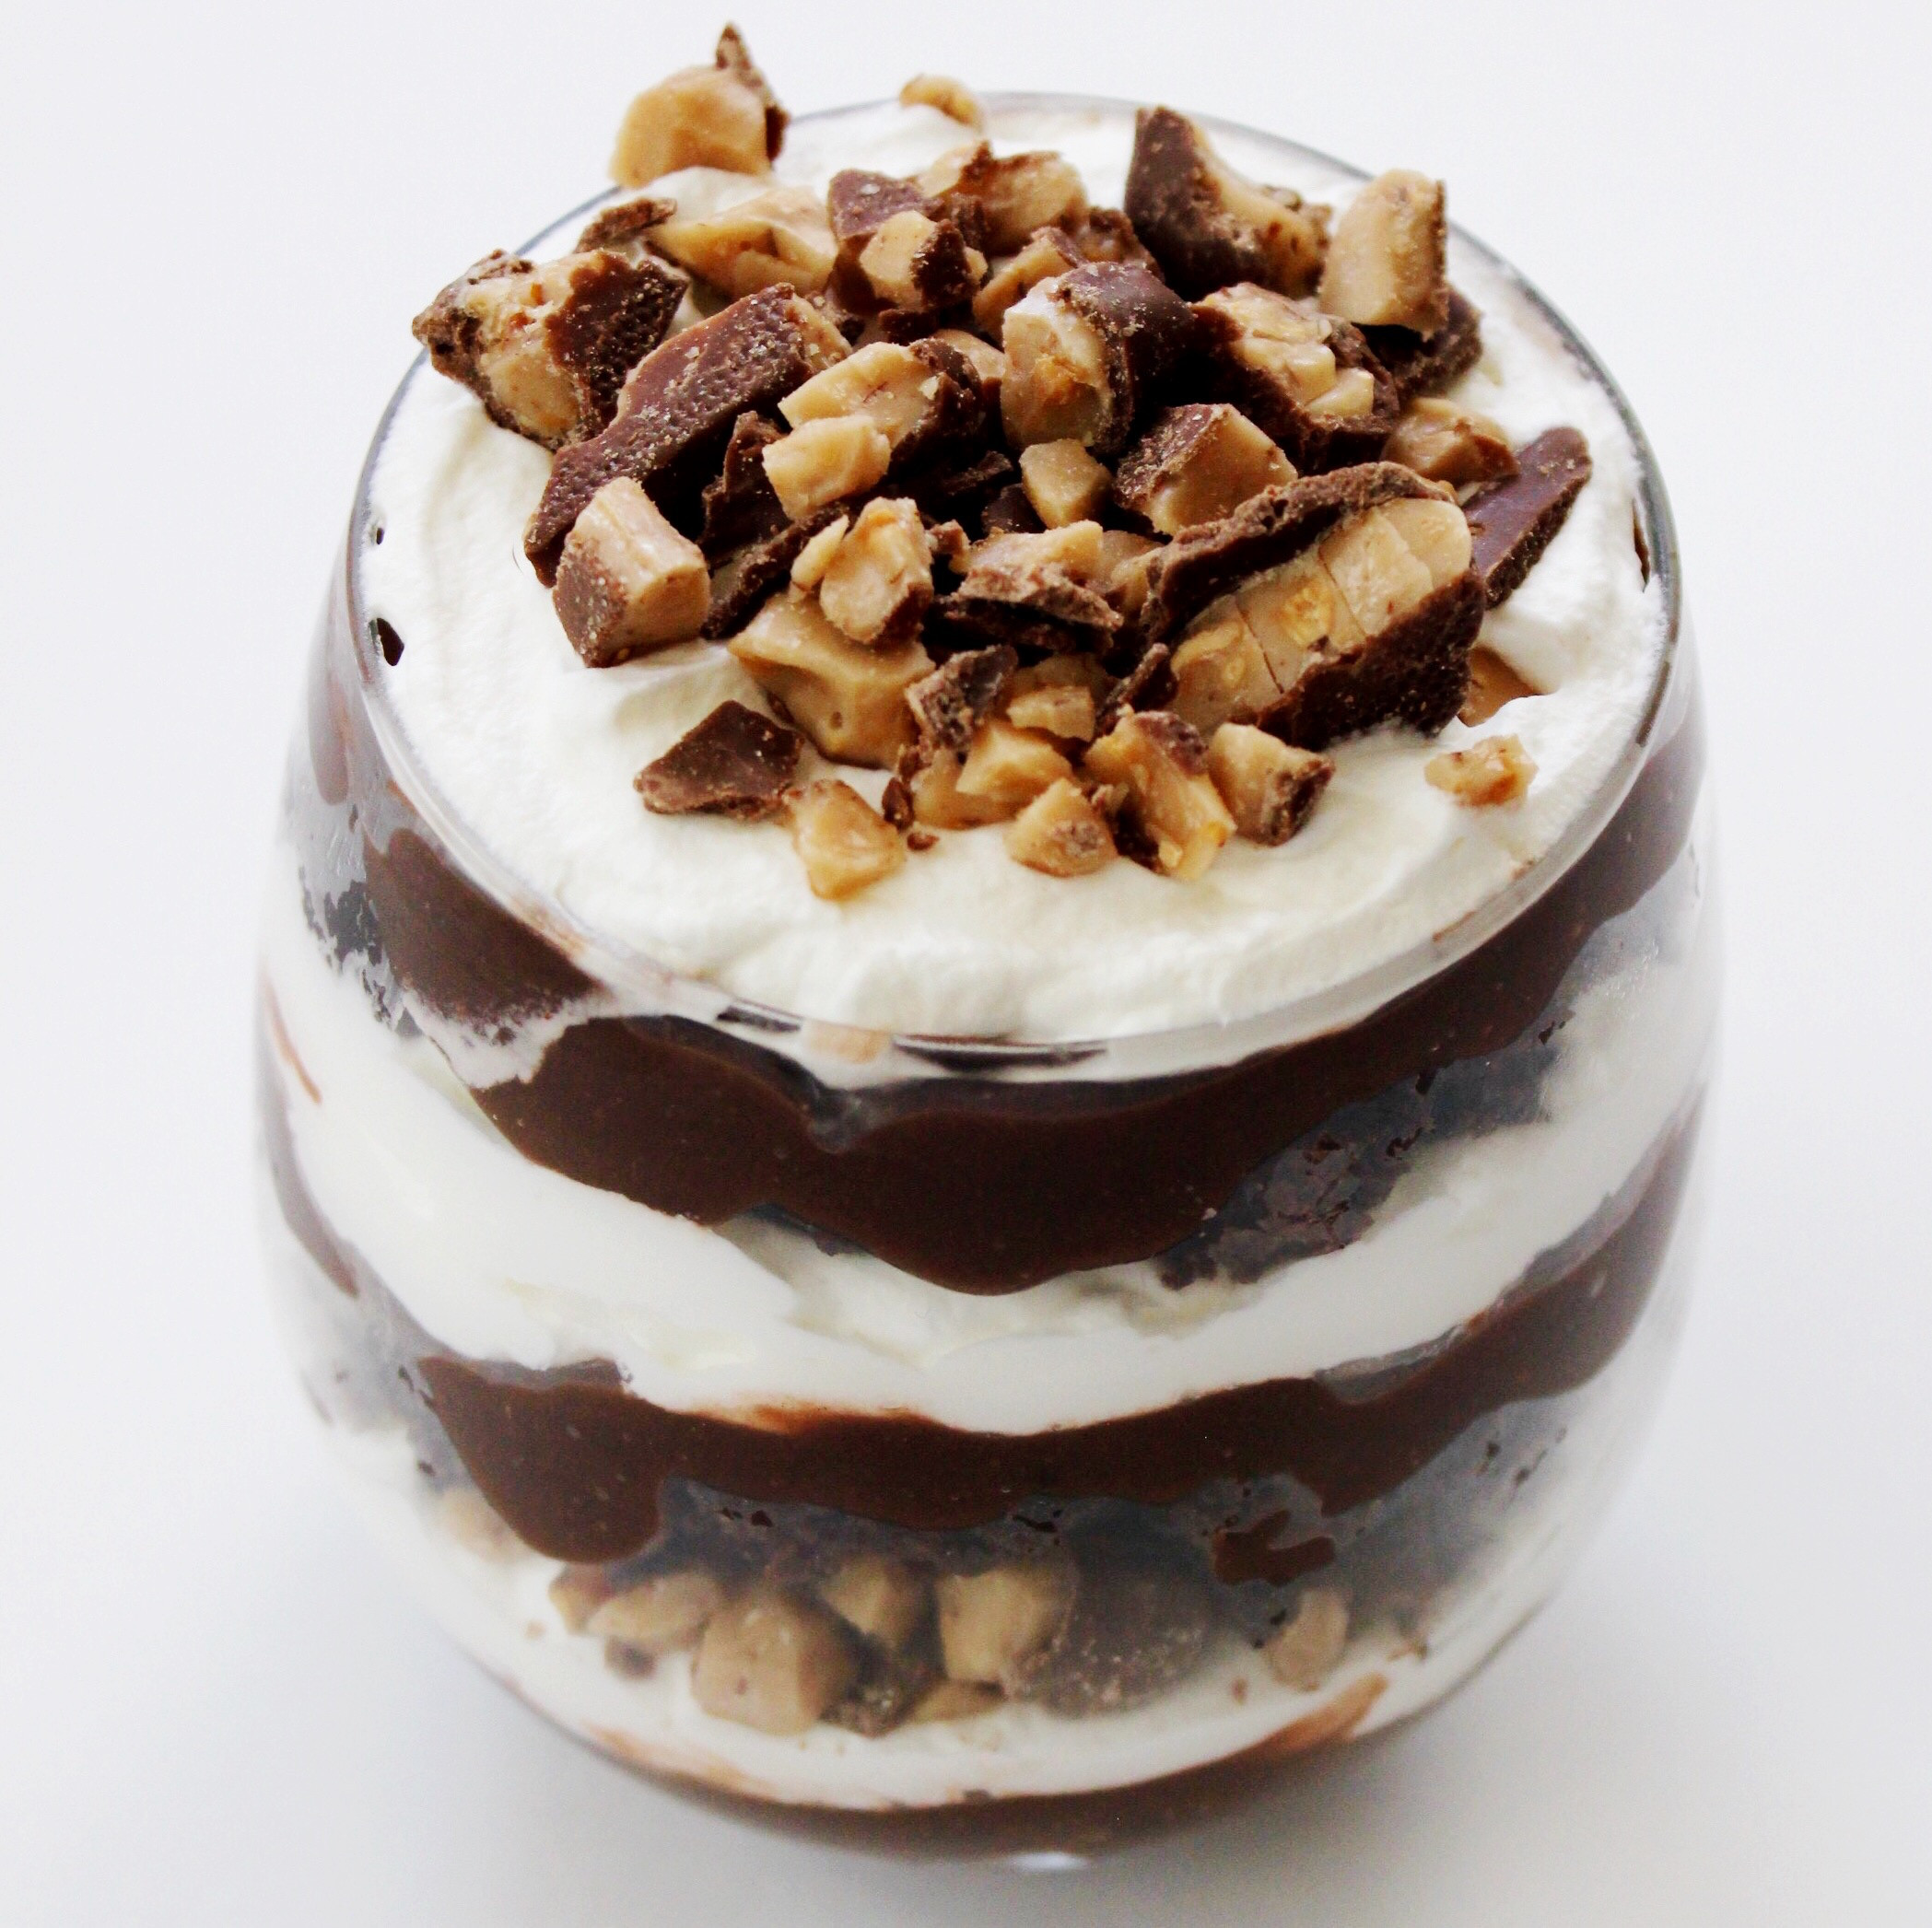 Easy Desserts To Impress
 Impress Your Guests with this Easy Chocolate Trifle for